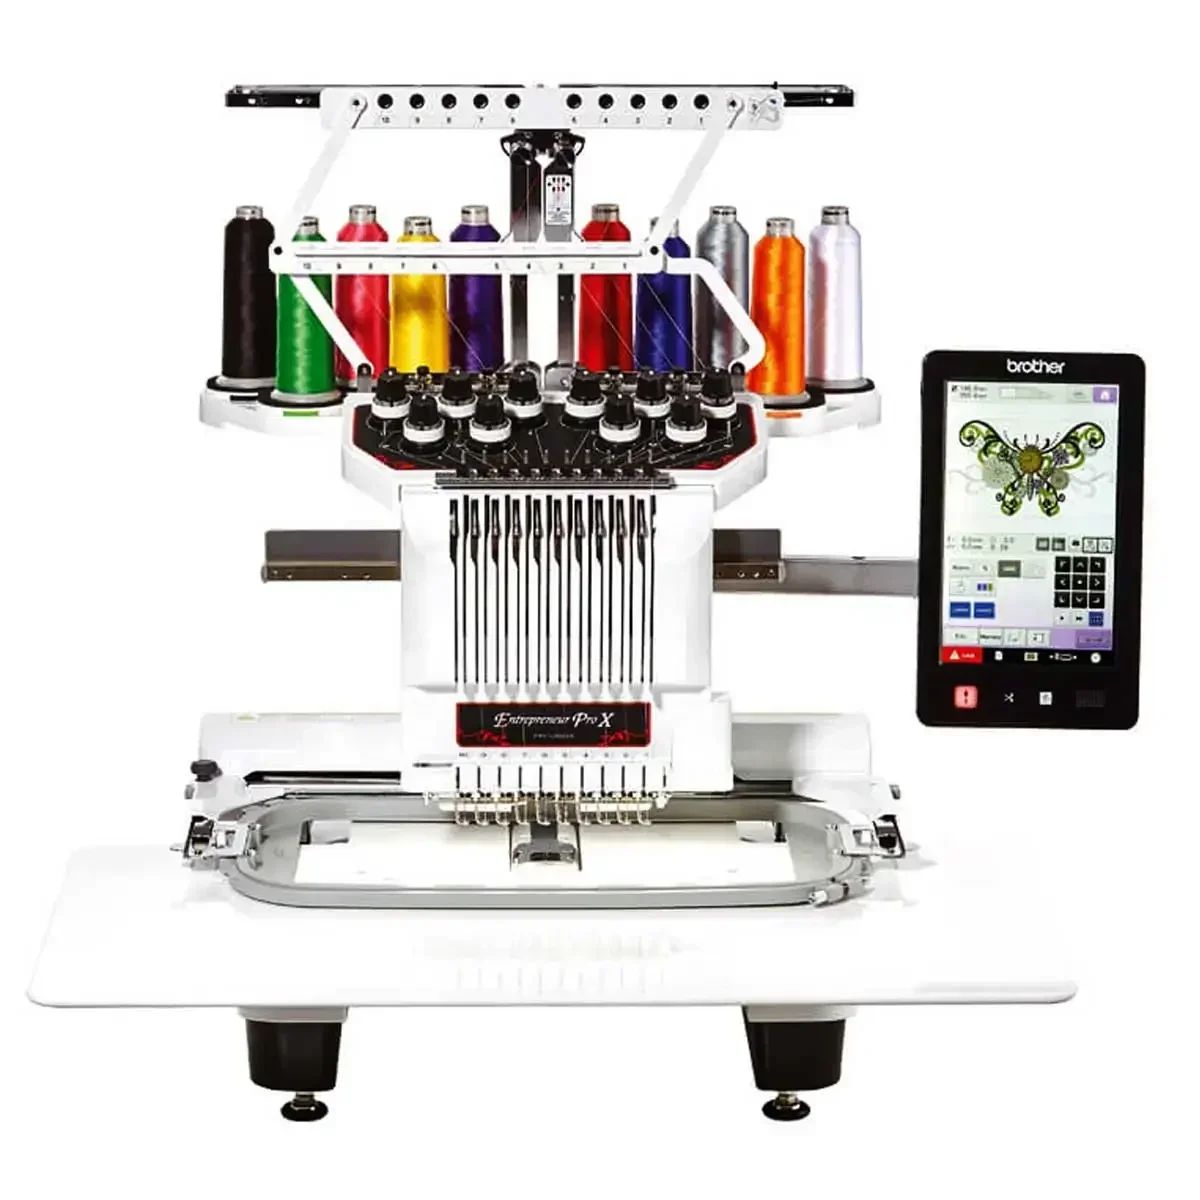 

SUMMER SALES DISCOUNT ON 100% original 20222 BROTHER PR1050X Commercial Embroidery Machine PR1050X 10-Needle Home Embroidery